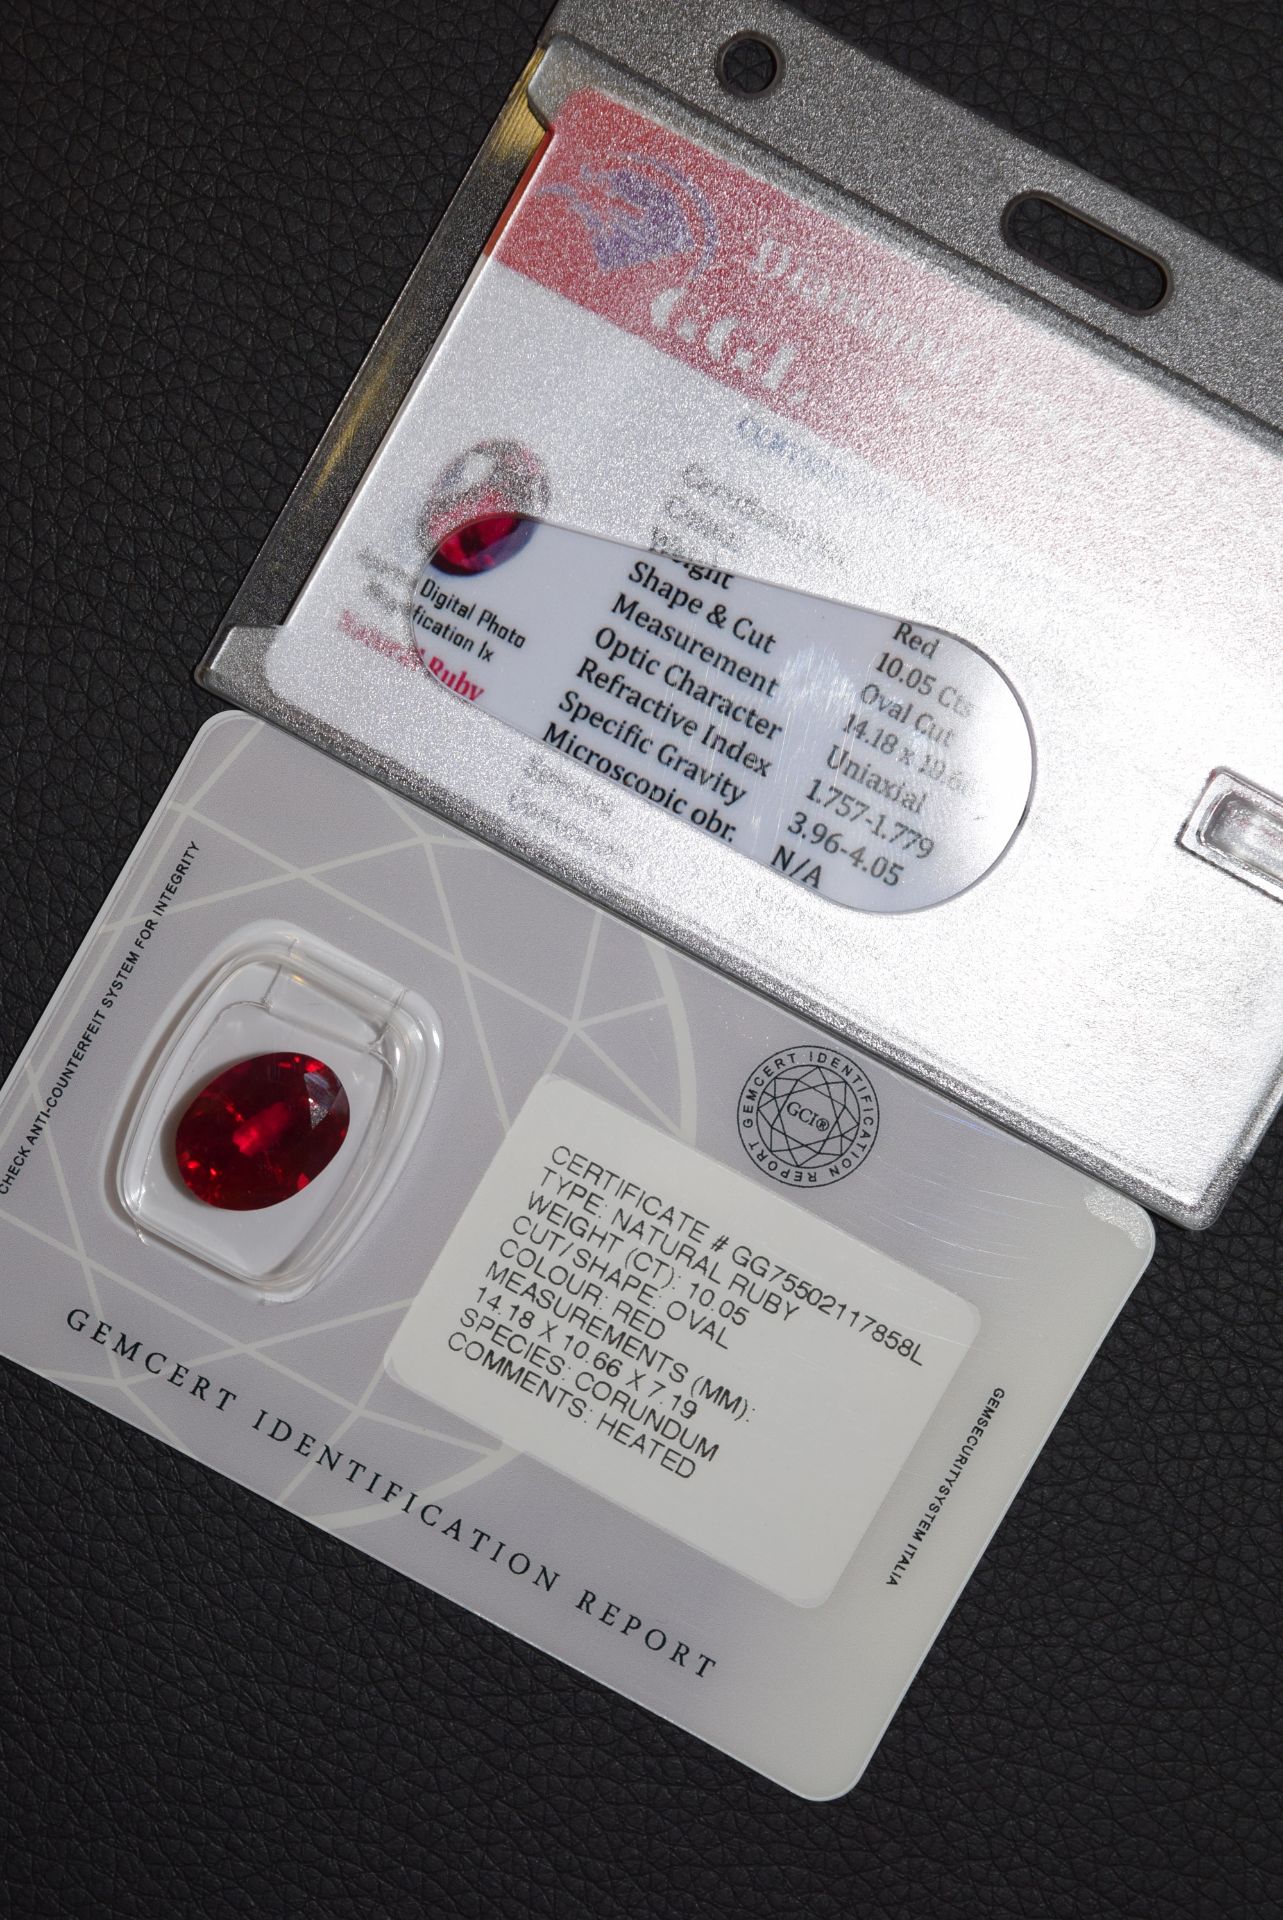 10.05 CT RUBY (GGL/ GCIR CERTIFICATION/ REPORT) - Image 2 of 5